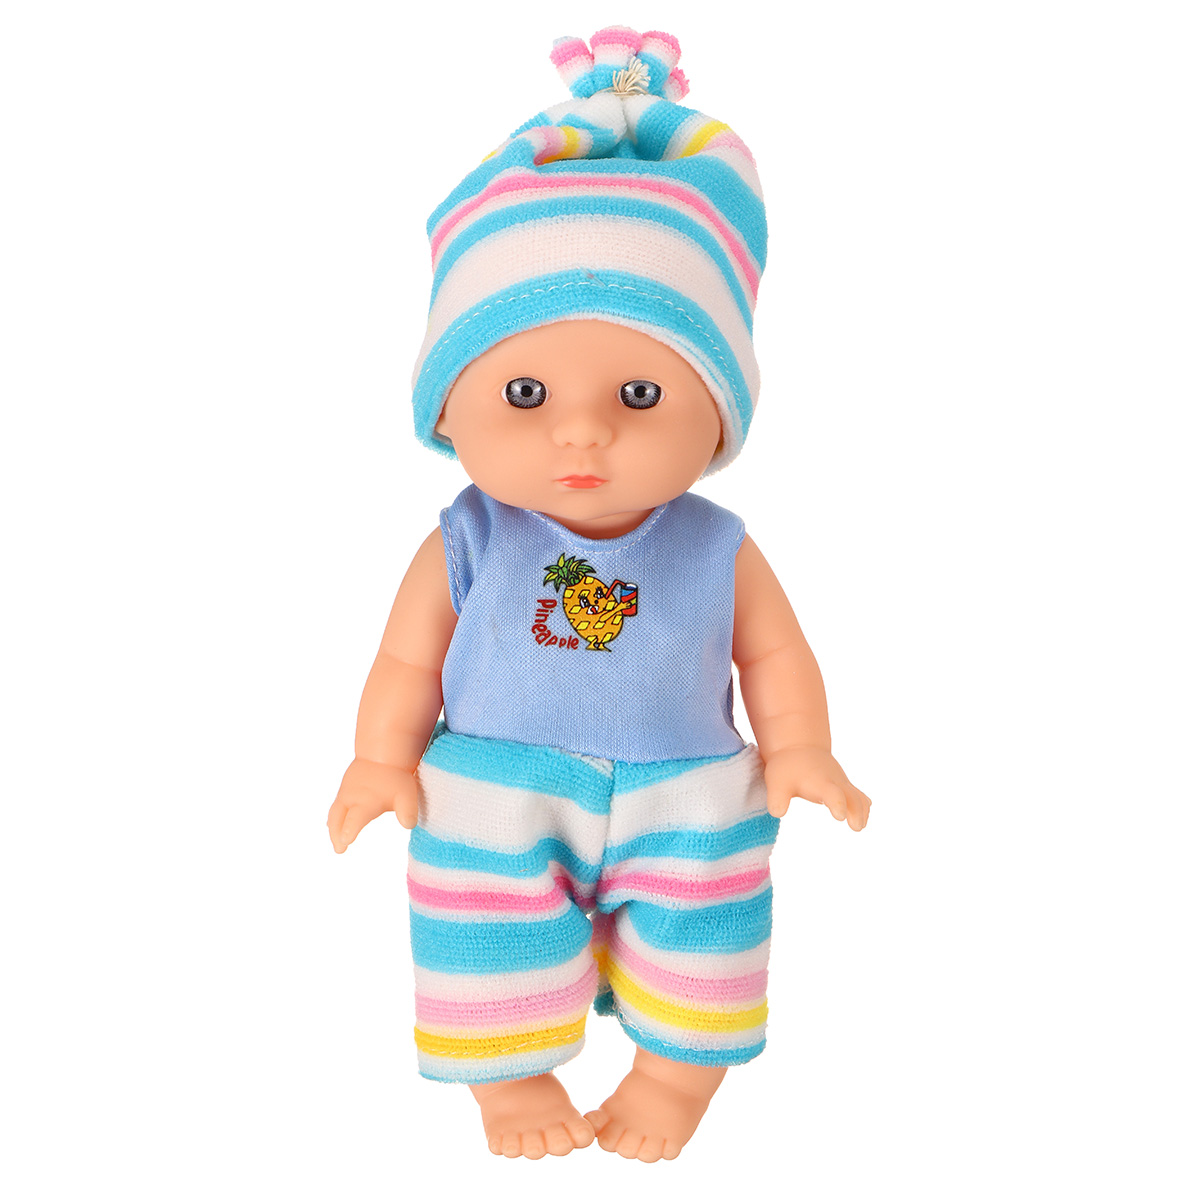 Simulation-Baby-3D-Creative-Cute-Doll-Play-House-Toy-Doll-Vinyl-Doll-Gift-1818655-19